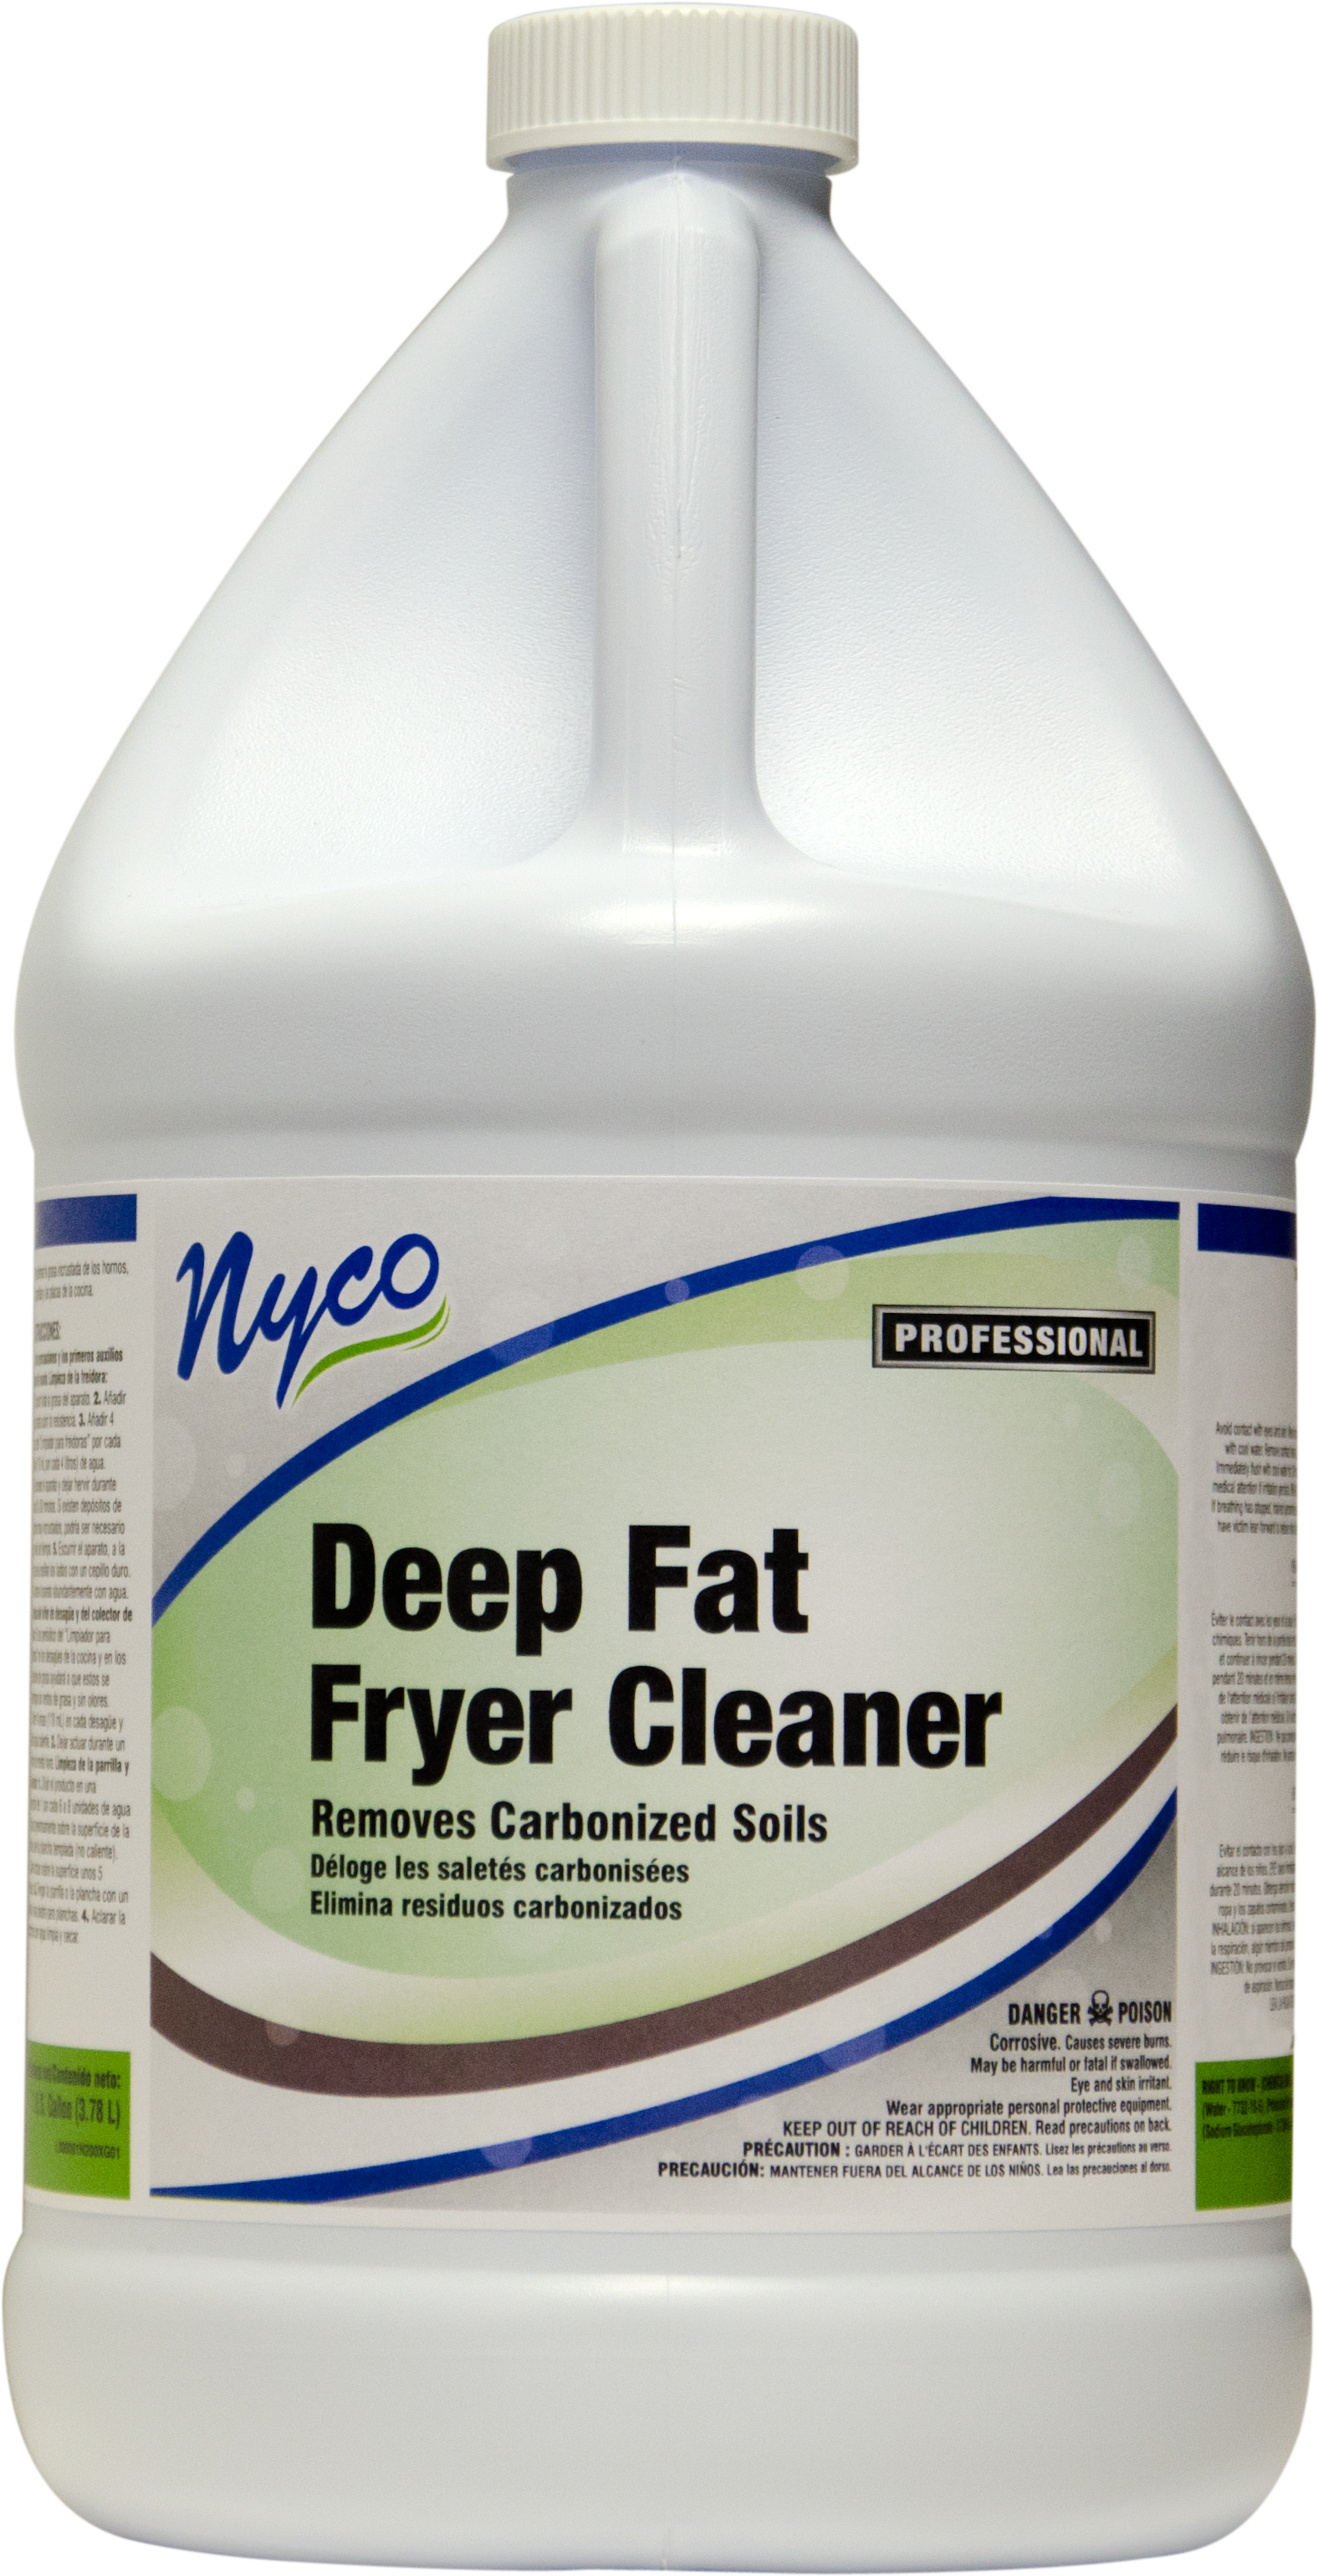 https://www.nycoproducts.com/wp-content/uploads/2016/07/NL200-G4_Deep-Fat-Fryer-Cleaner-1.png